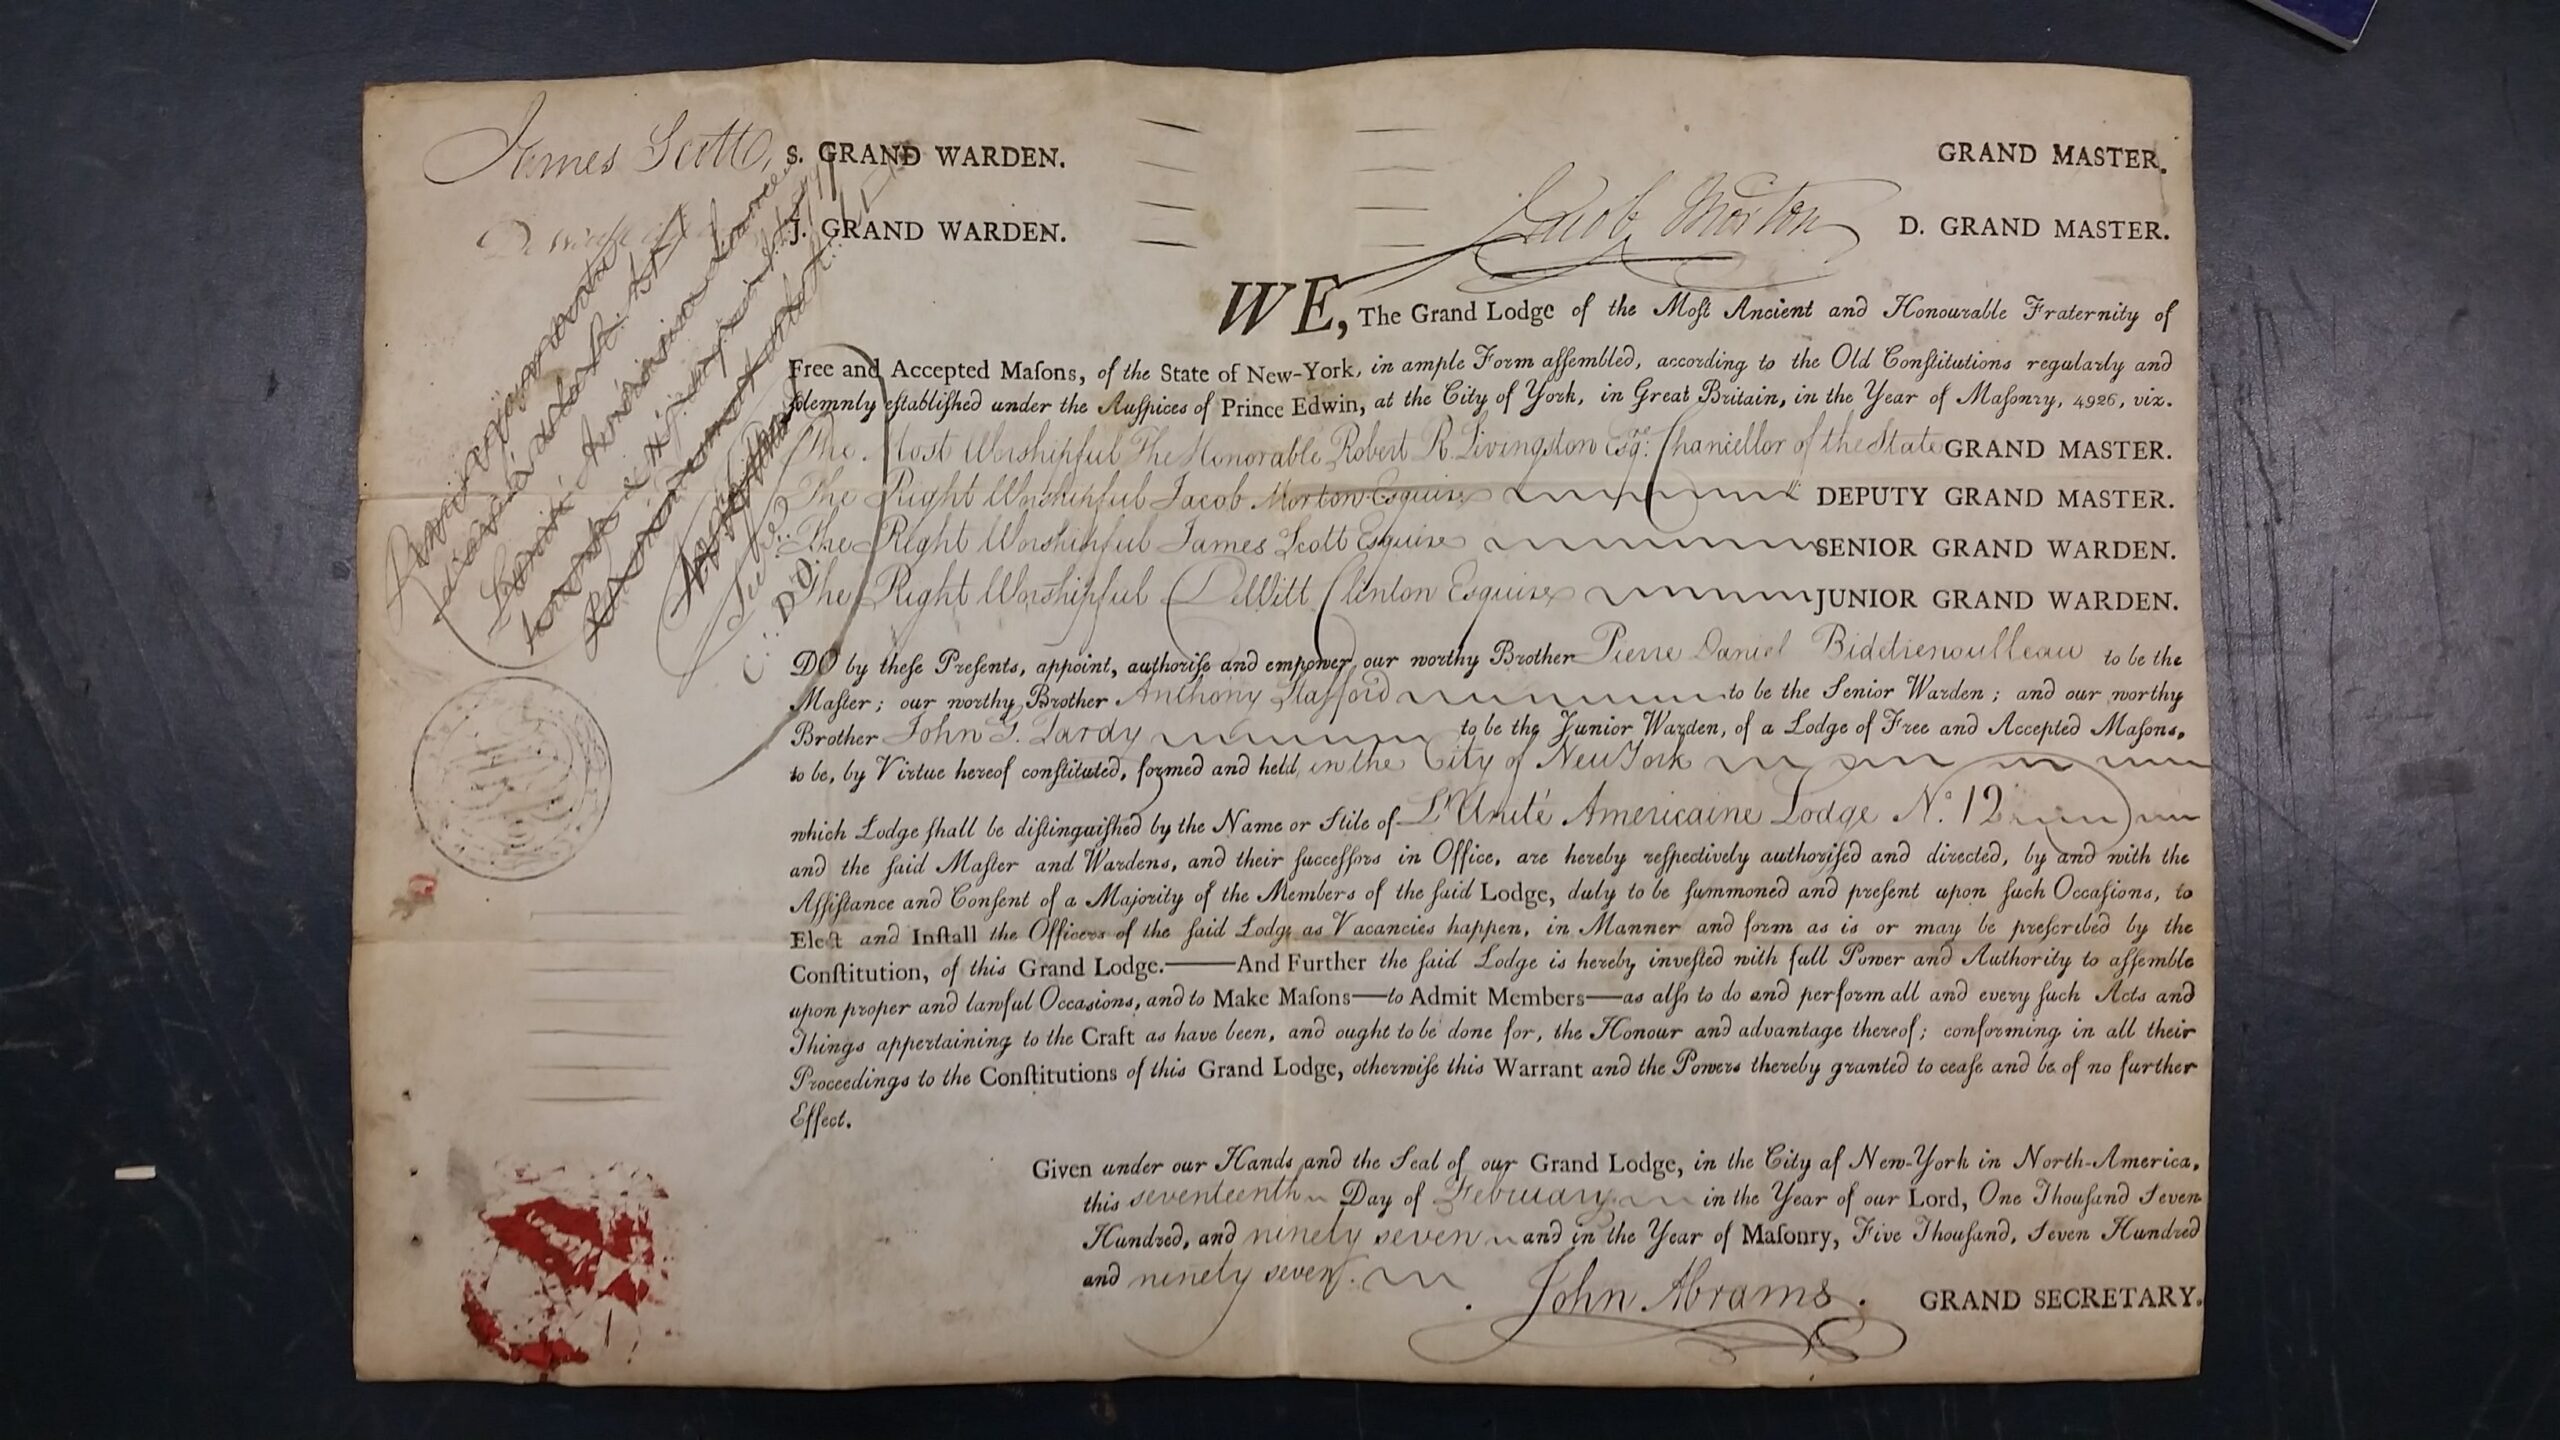 Warrant for Official Creation of Lodge